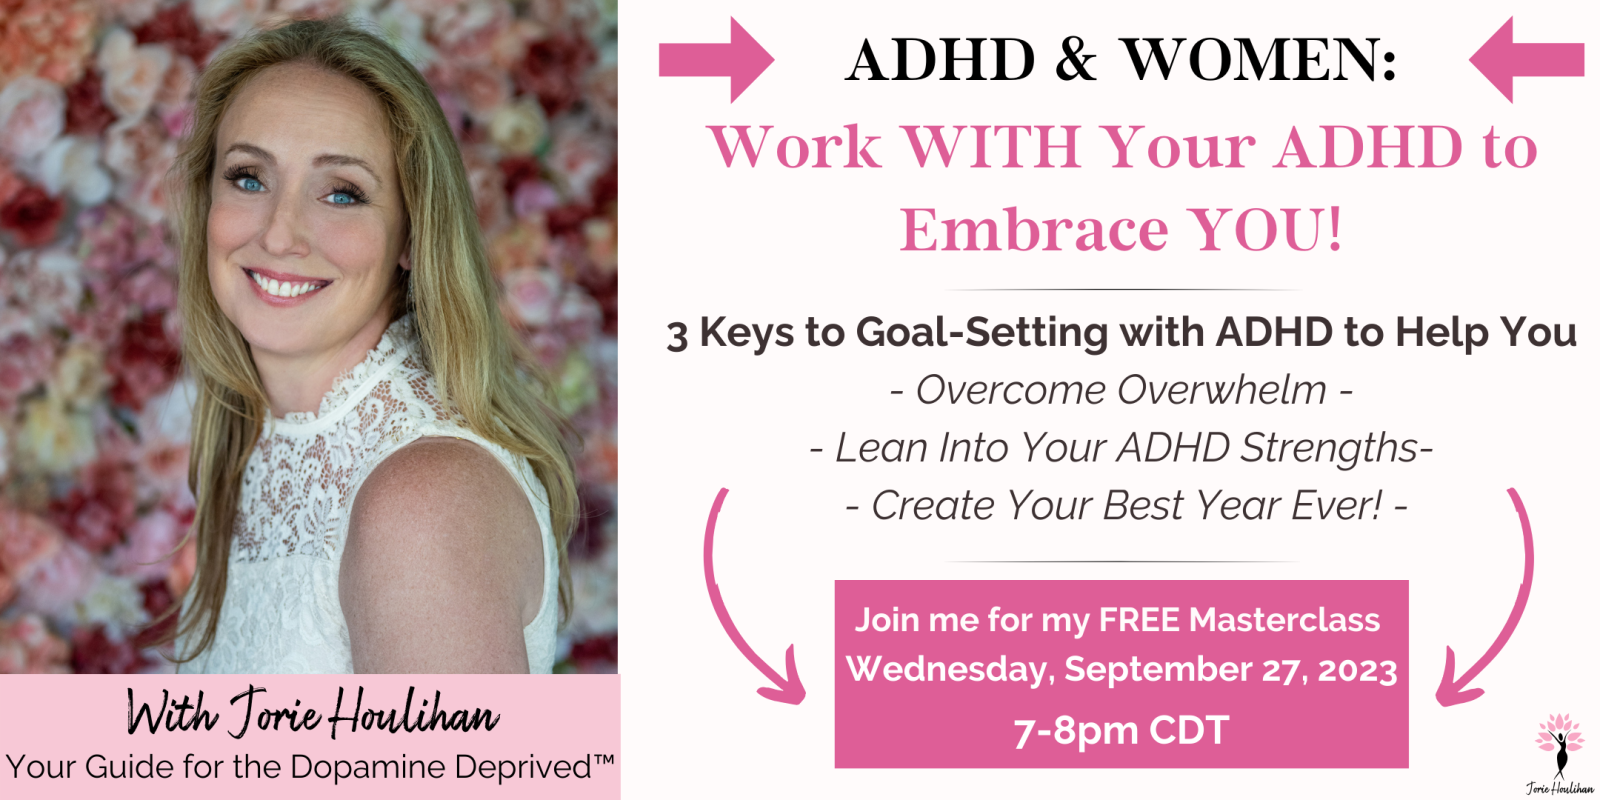 ADHD & Women: Work WITH Your ADHD to Embrace YOU!